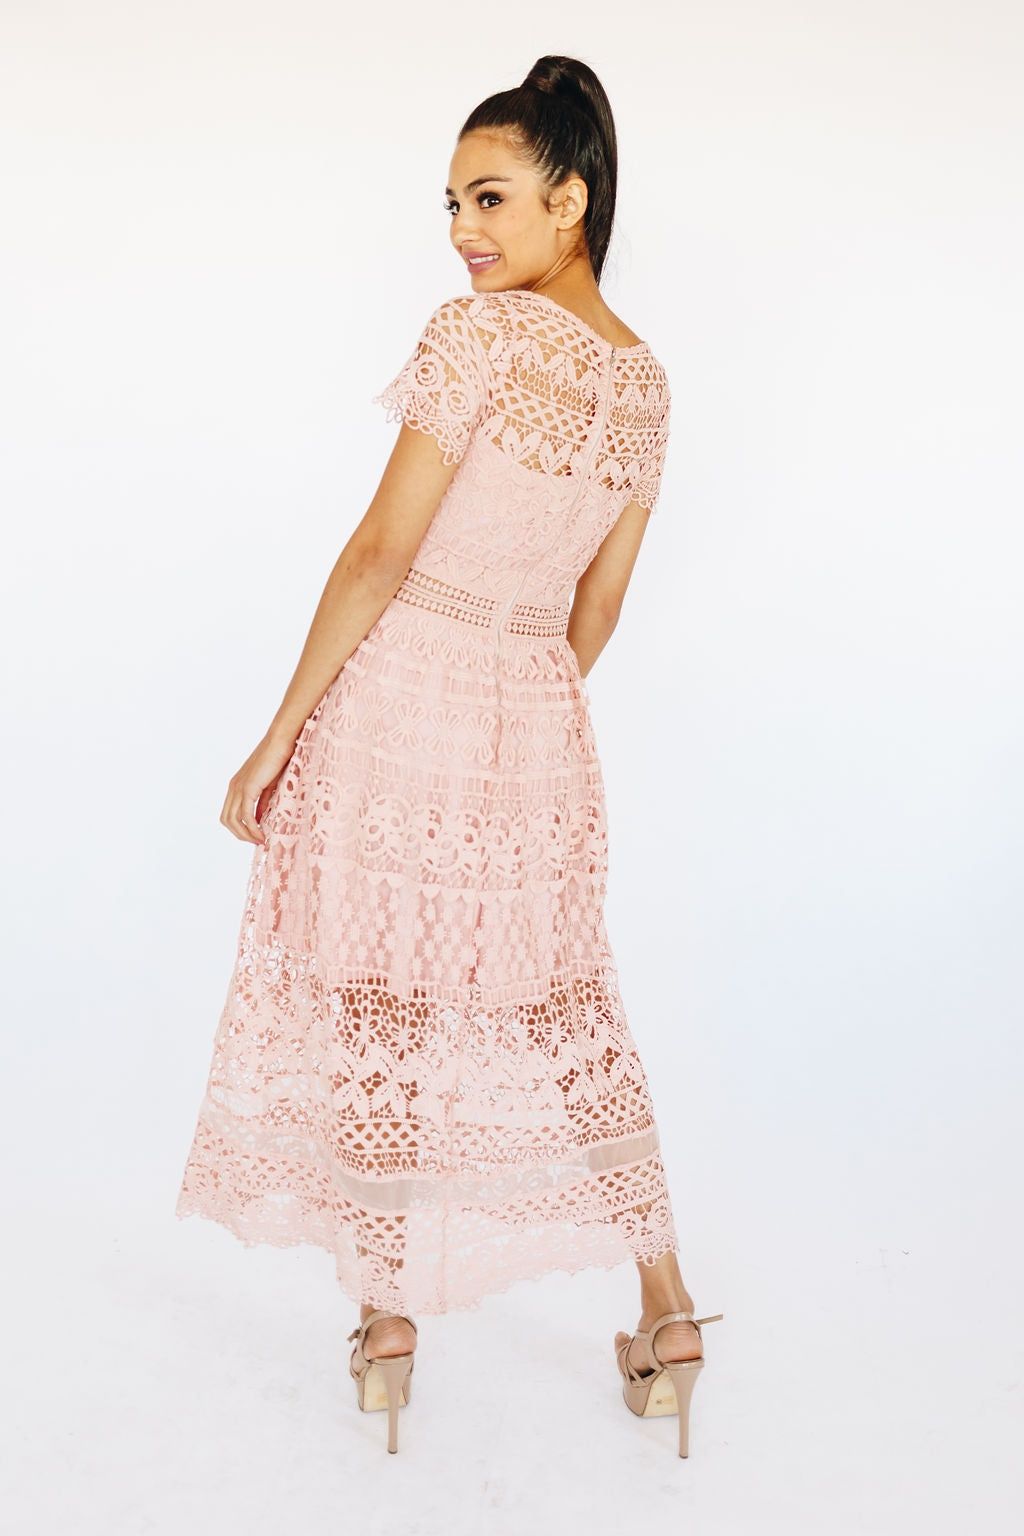 Style JMD7133-1 AURORA Just Me Size 4 Homecoming Cap Sleeve Lace Light Pink Cocktail Dress on Queenly